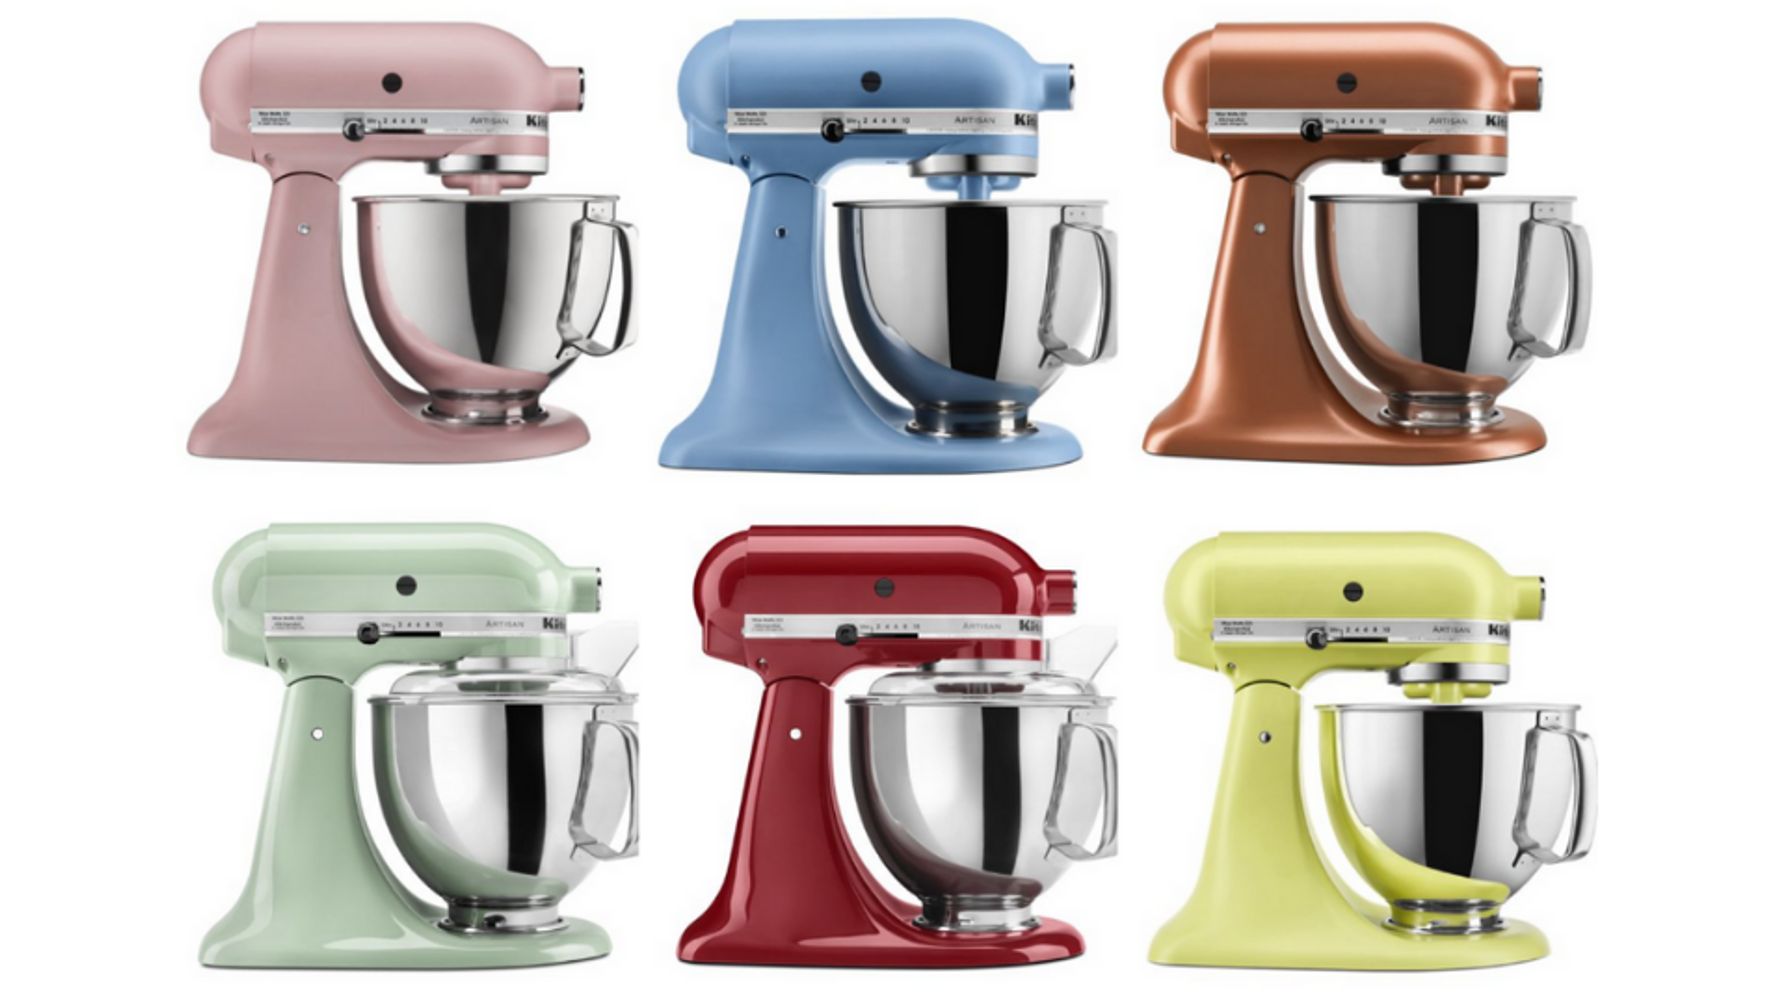 The Kitchen Aid Stand Mixer Is Indispensable